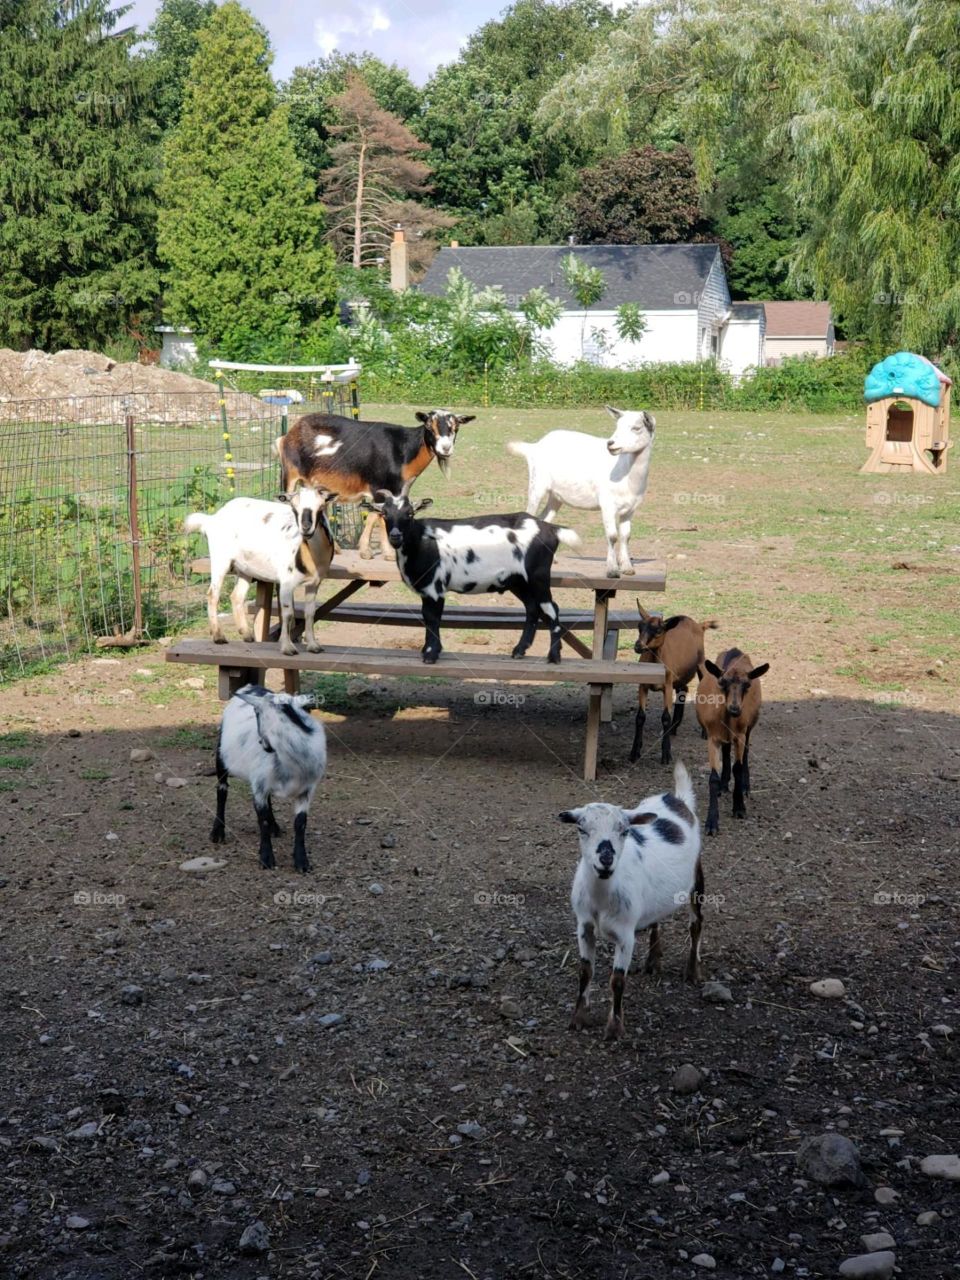 Goats in a pose. 